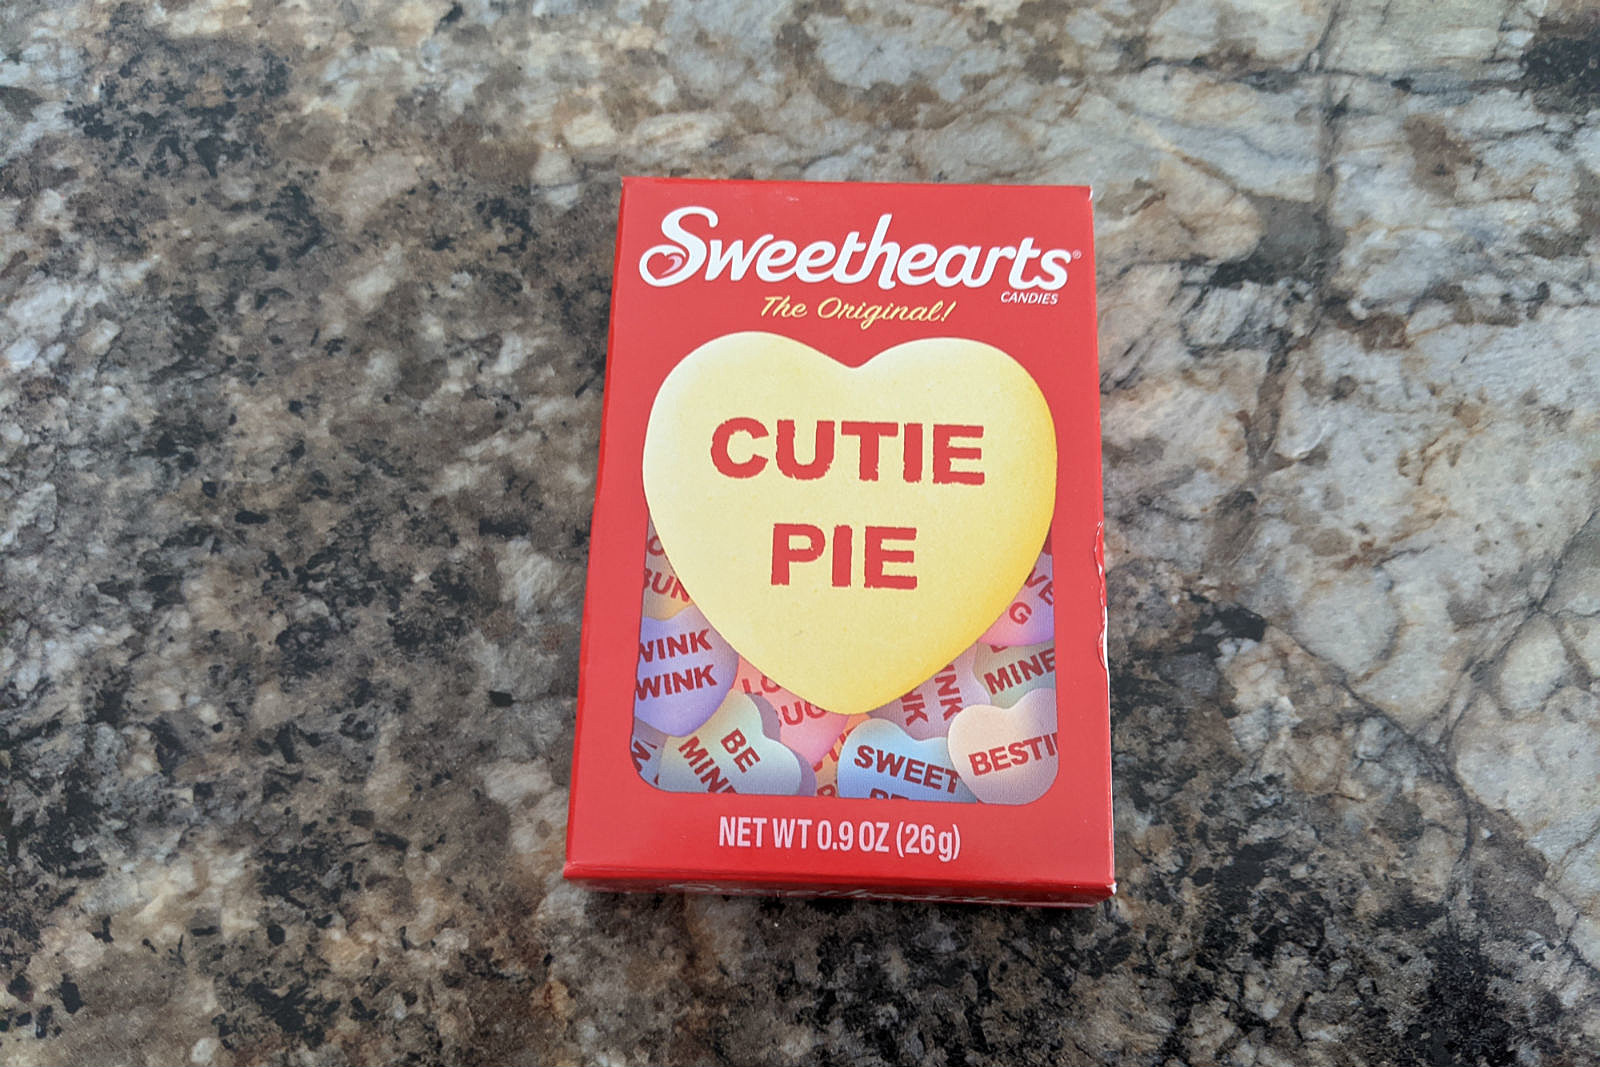 I Finally Found Sweethearts Candy Hearts, But There's a Problem